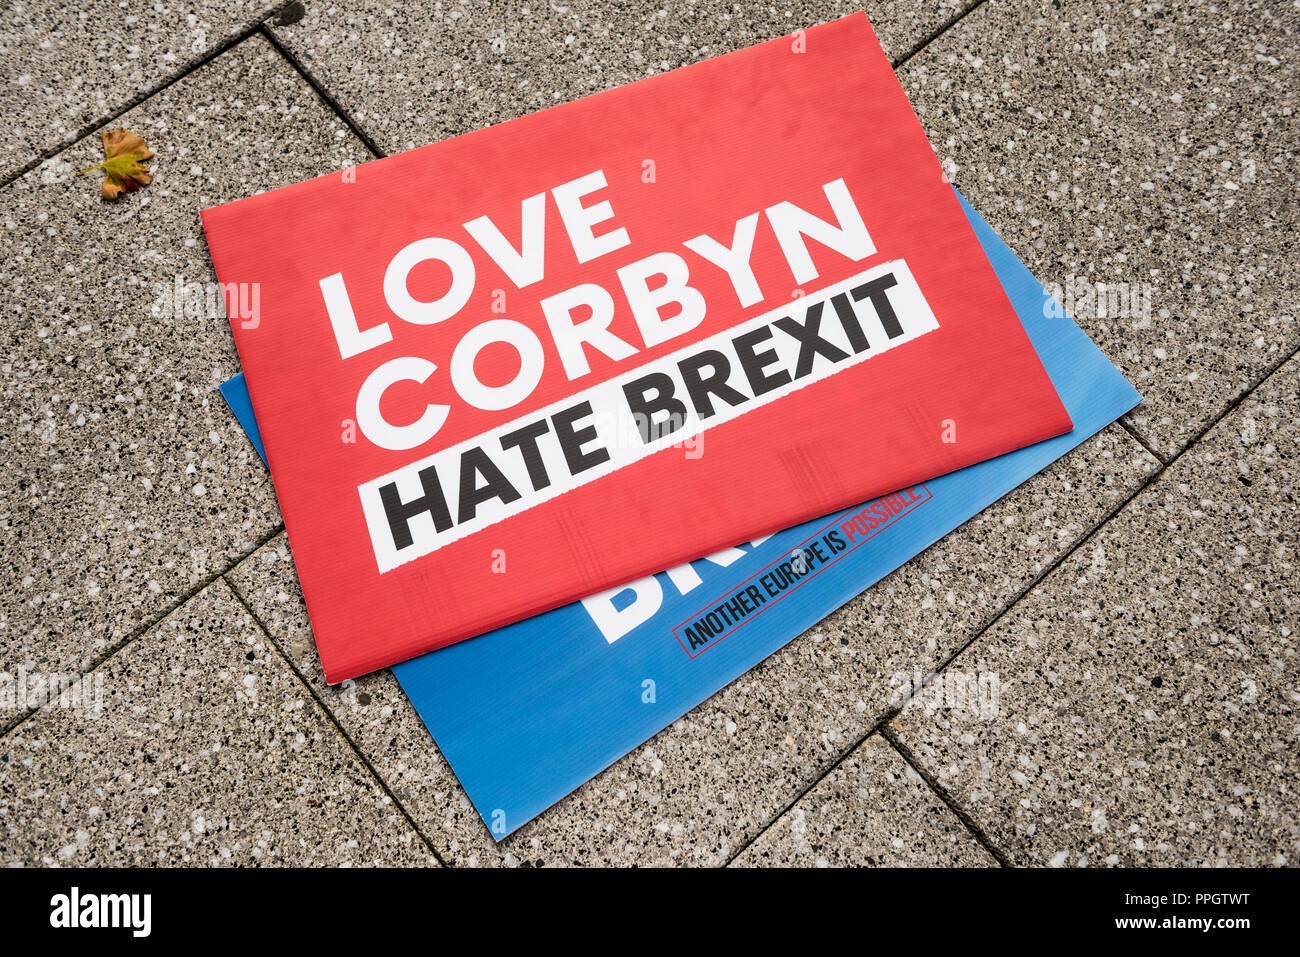 Liverpool, England 25 September 2018, Labour Conference, Arenna Conference Centre Albert Docks. Various alternative campaigns and rallies outside of main conference centre. Credit: Rena Pearl/Alamy Live News Stock Photo